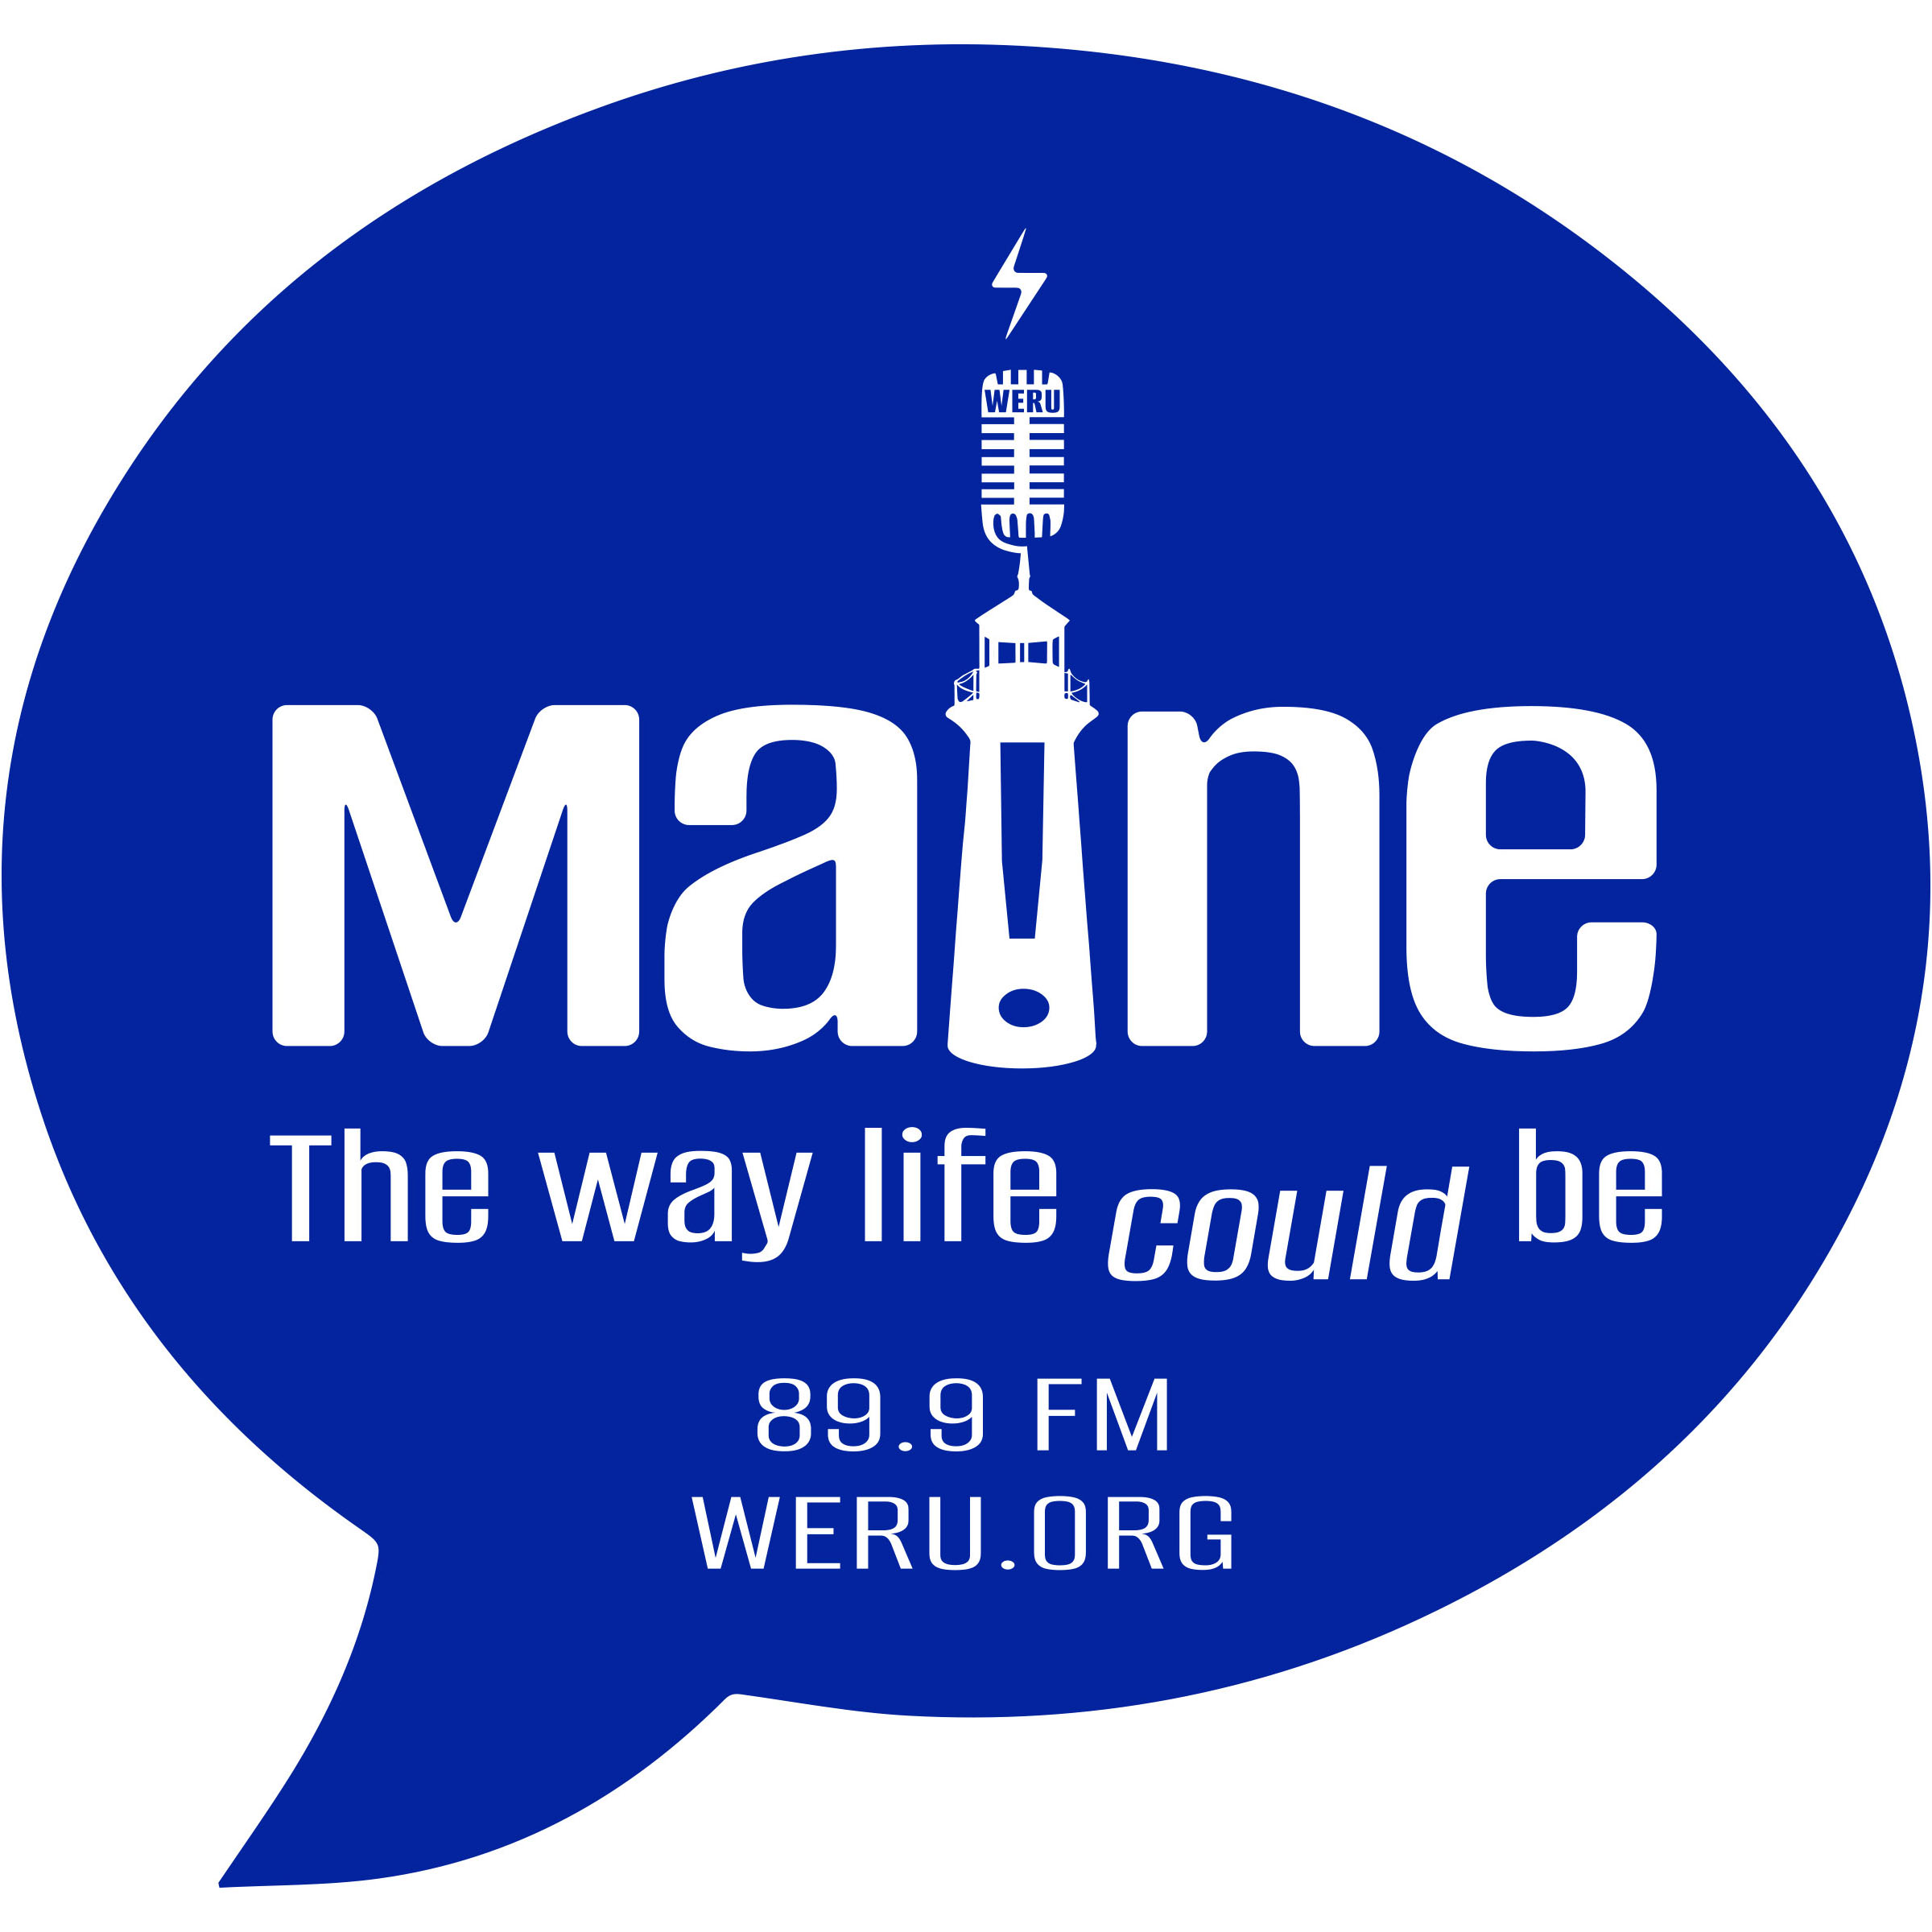 Maine: The Way Life Could Be  WERU 89.9 FM Blue Hill, Maine Local News and  Public Affairs Archives